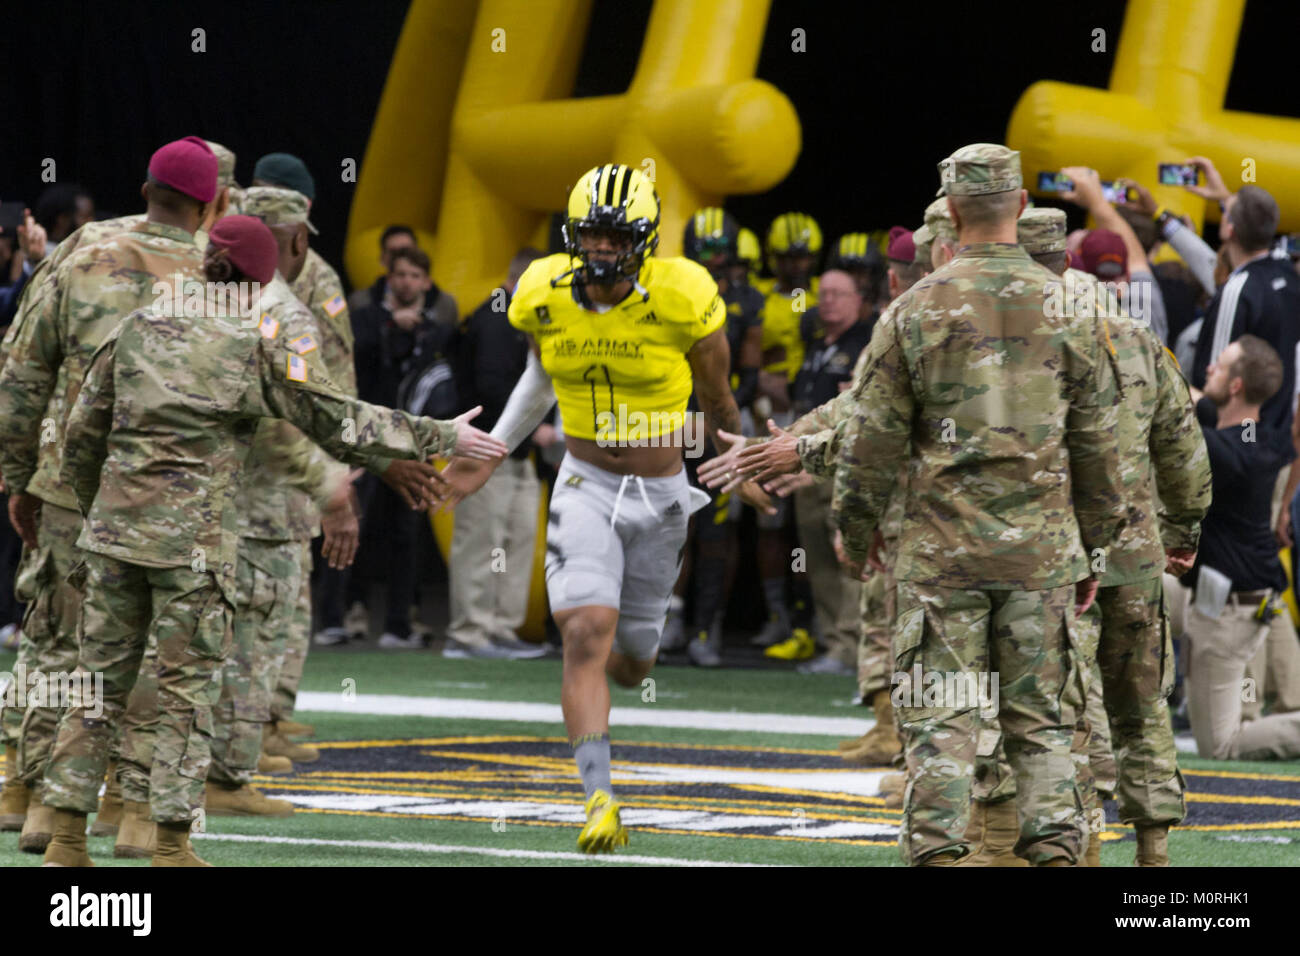 Jaiden Woodbey, an athlete from St. John Boscoe High School in Bellflower, Calif., runs out onto the field during the pre-game events at the U.S. Army All-American Bowl Jan. 6, 2018, in San Antonio, Texas. The All-American Bowl is the nation’s premier high school football game, serving as the preeminent launching pad for America’s future college and National Football League stars. (U.S. Army Stock Photo